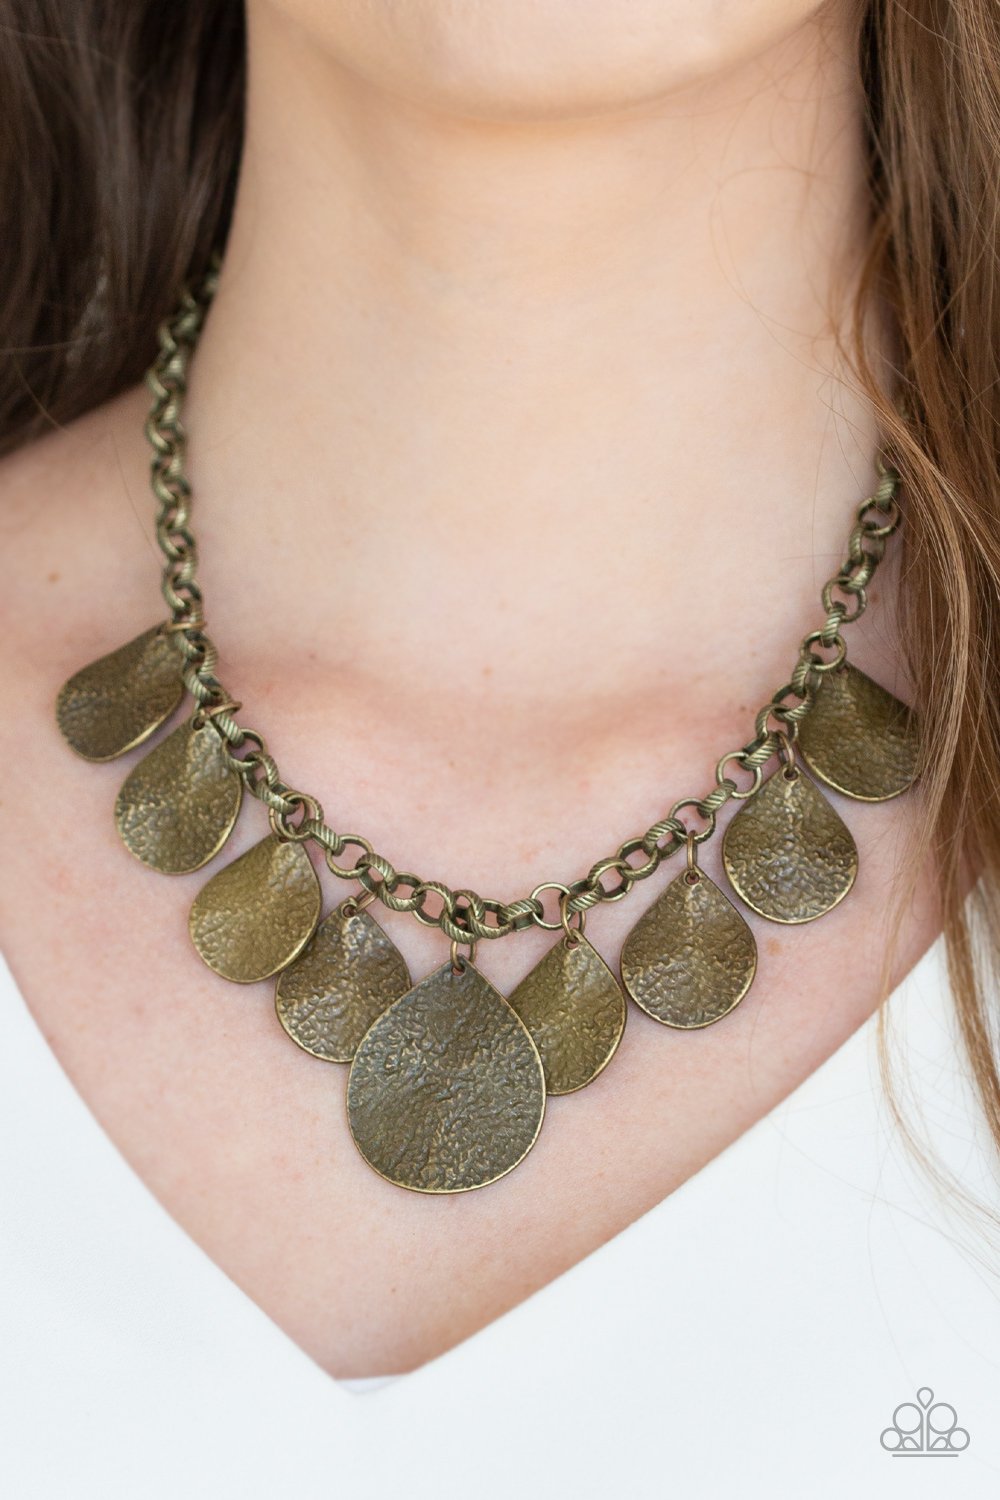 Texture Storm - Brass Fashion Necklace - Paparazzi Accessories - Hammered in antiqued shimmer, shiny brass teardrops dangle from a textured brass chain, creating an edgy fringe below the collar. Features an adjustable clasp closure.